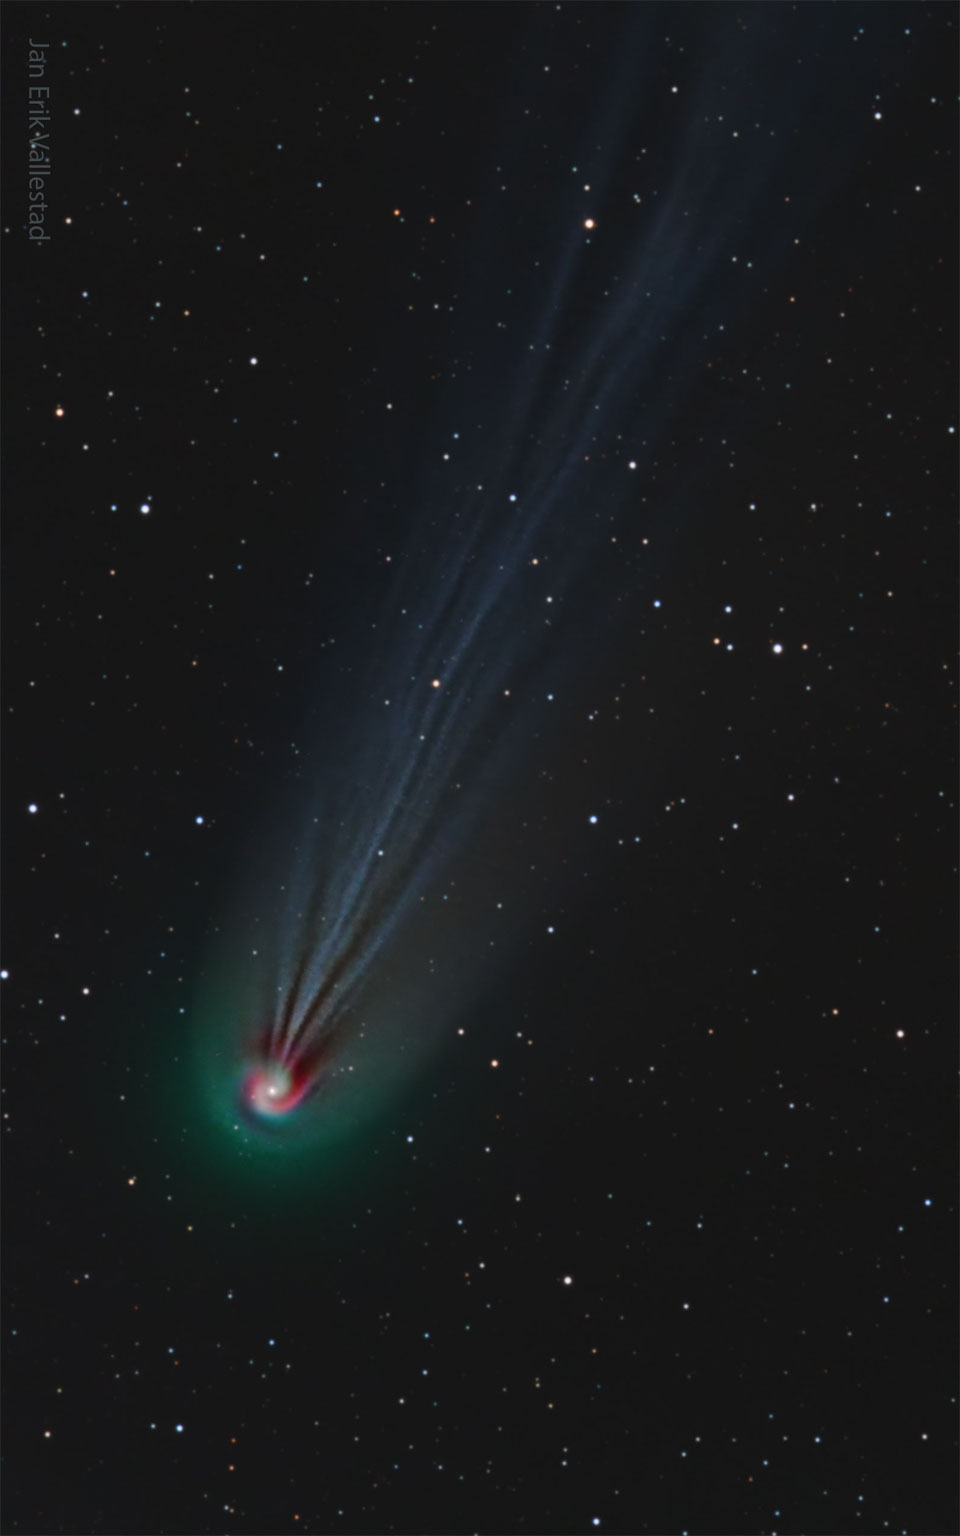 A comet is pictured with a really long and wavy ion tail.
The front of the comet -- its coma -- appears to be a spiral.
The coma is green, the tail is faint blue, and part of the 
swirl is red.
Więcej szczegółowych informacji w opisie poniżej.